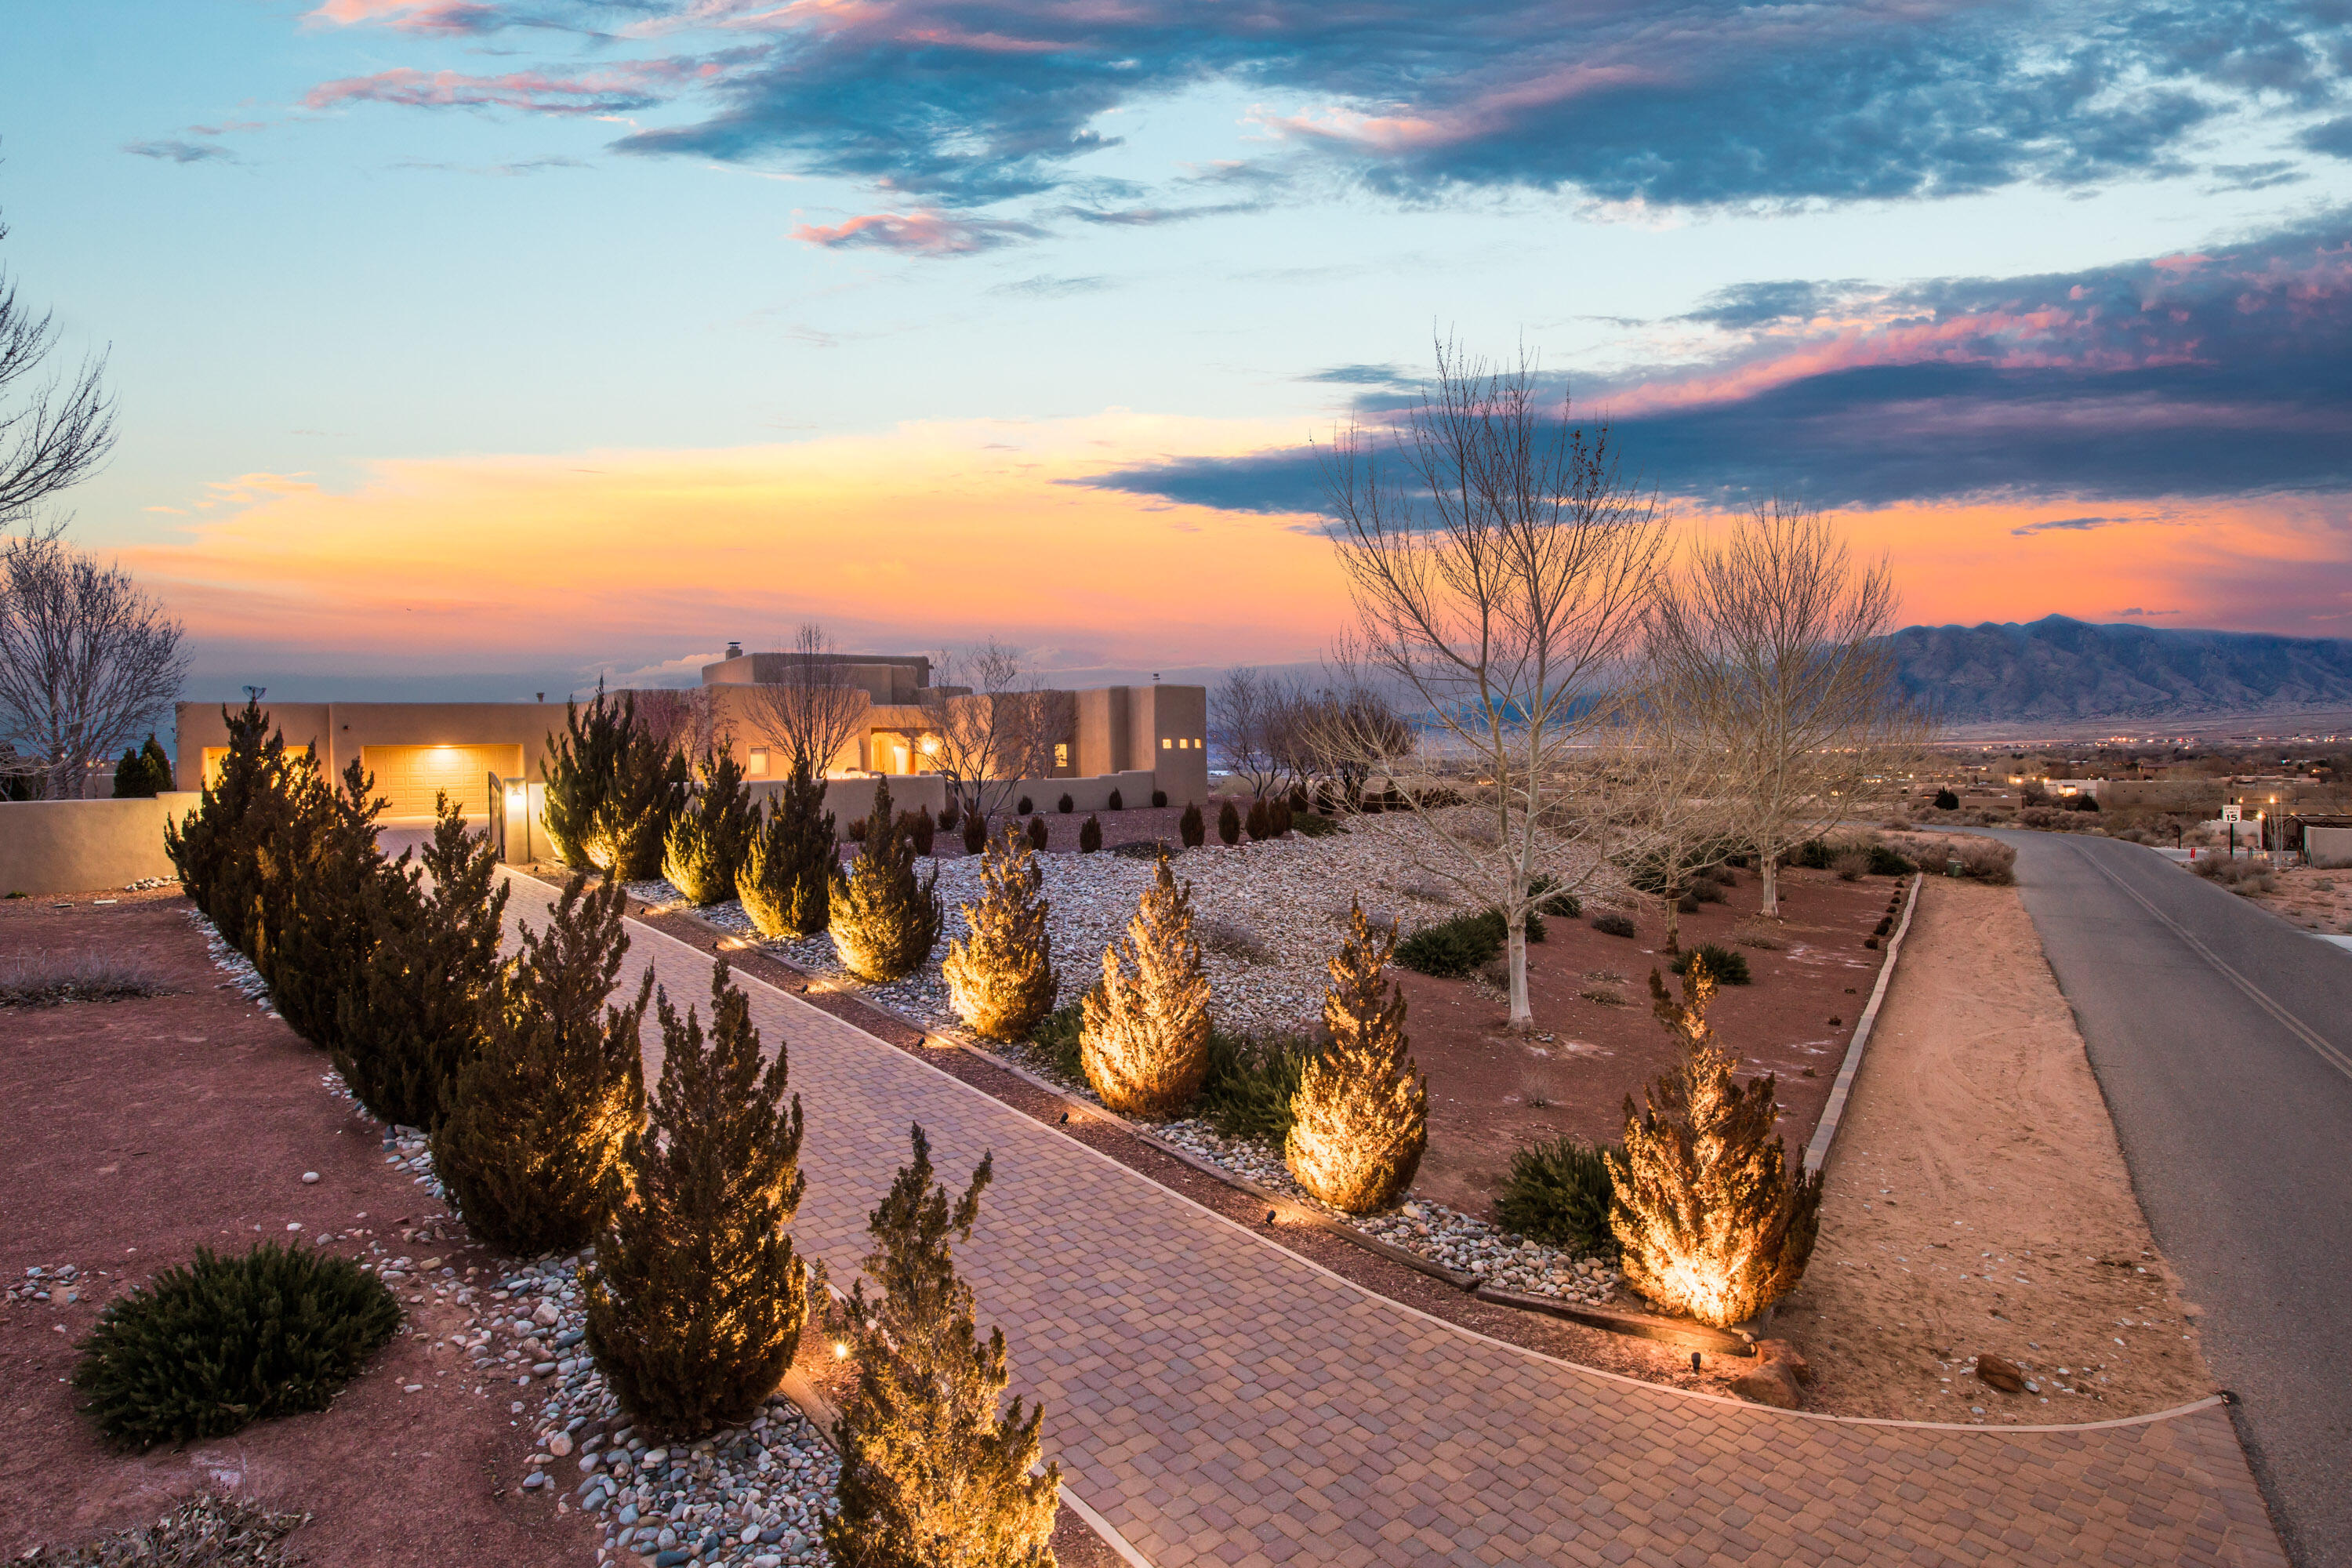 Each sunlit corner of this custom pueblo shines with luxury. Private owner's wing, generous rooms & courtyards. This is a retreat! Xeriscaping compliments desert beauty & inspiring views of the city & mountains. Arches into wings of the home flank the elegant entry. The owner's ensuite is a personal spa w/ dual vanities, jetted garden tub and walk-in shower. Living room features soaring wood ceilings, beams & kiva fireplace for warmth and ambiance. Chef's kitchen features granite, travertine backsplash, knotty alder cabinets, top-of-the-line appliances, island & butler's pantry. Solarium, 2 offices, media room & inner courtyard. Every window frames a gorgeous view of the landscape & artfully designed exterior w/ backyard that's ideal for al fresco entertaining.